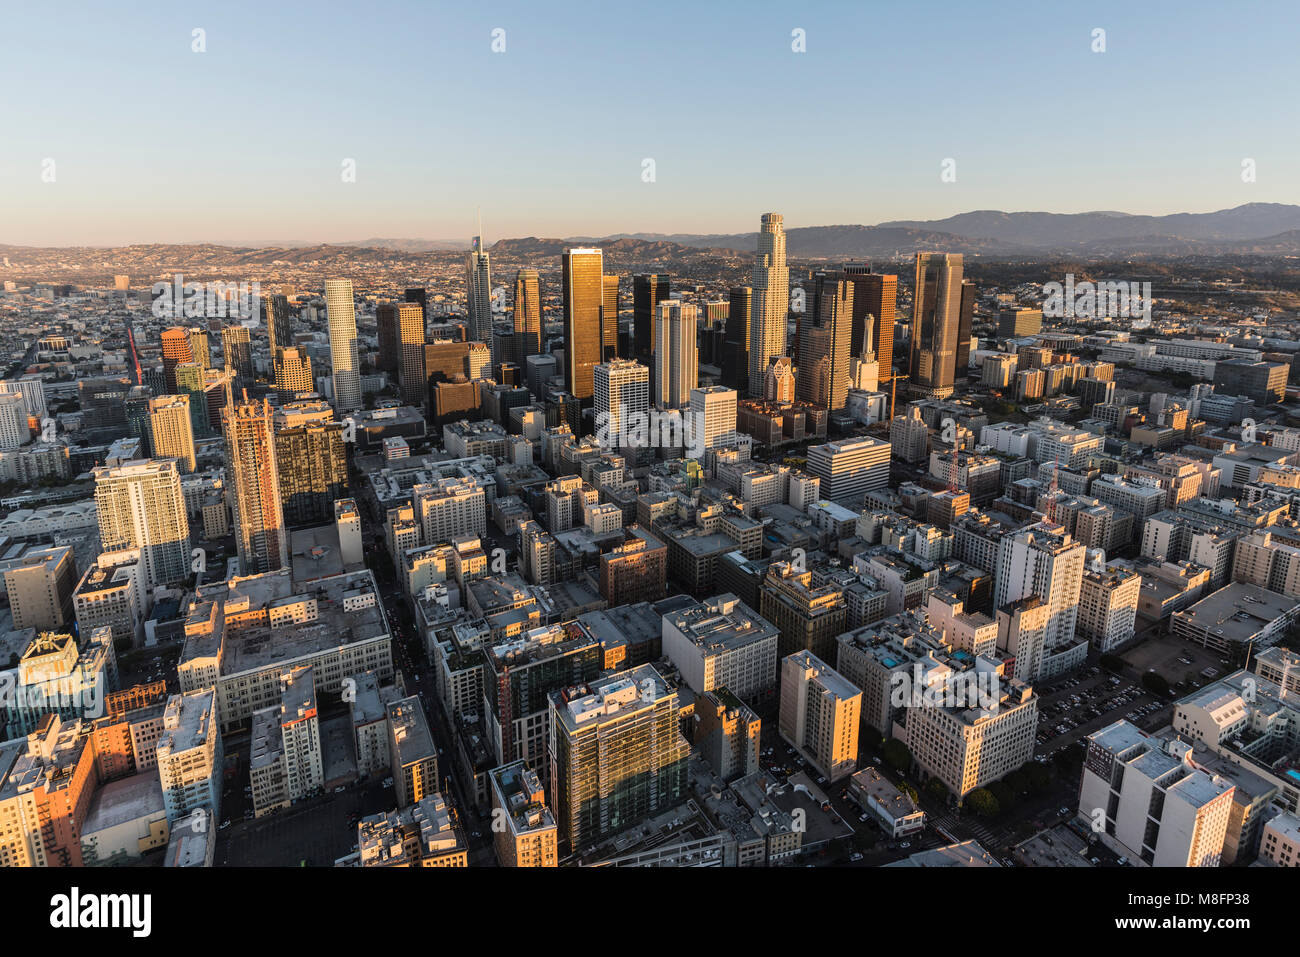 Los Angeles, California, USA - February 20, 2018:  Early morning aerial view of towers, streets and buildings in downtown LA. Stock Photo